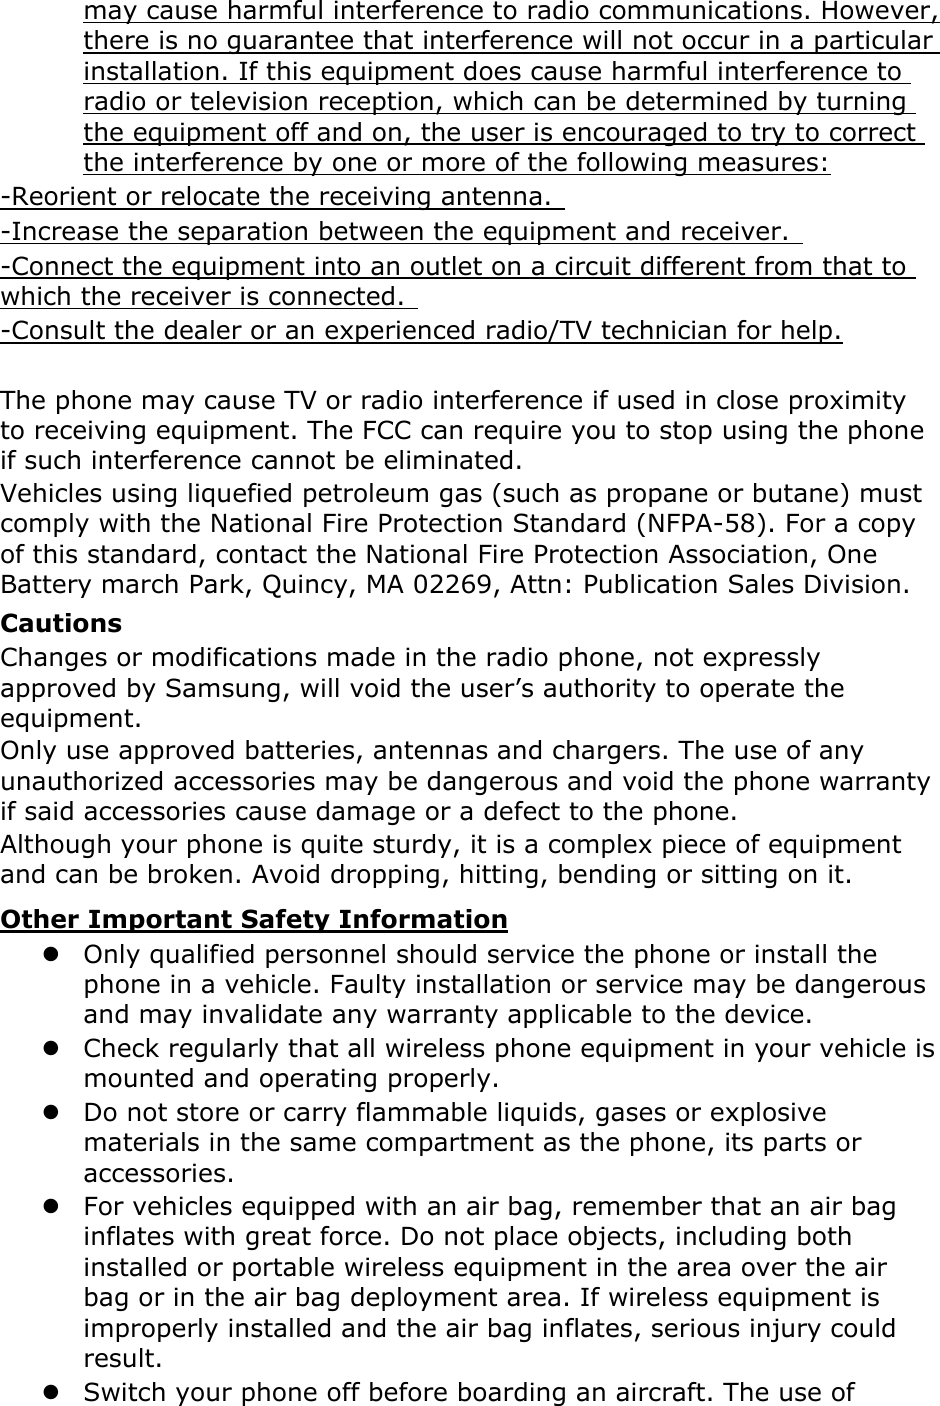 Page 23 of Samsung Electronics Co GTS8600 Cellular/PCS GSM Phone with WLAN and Bluetooth User Manual